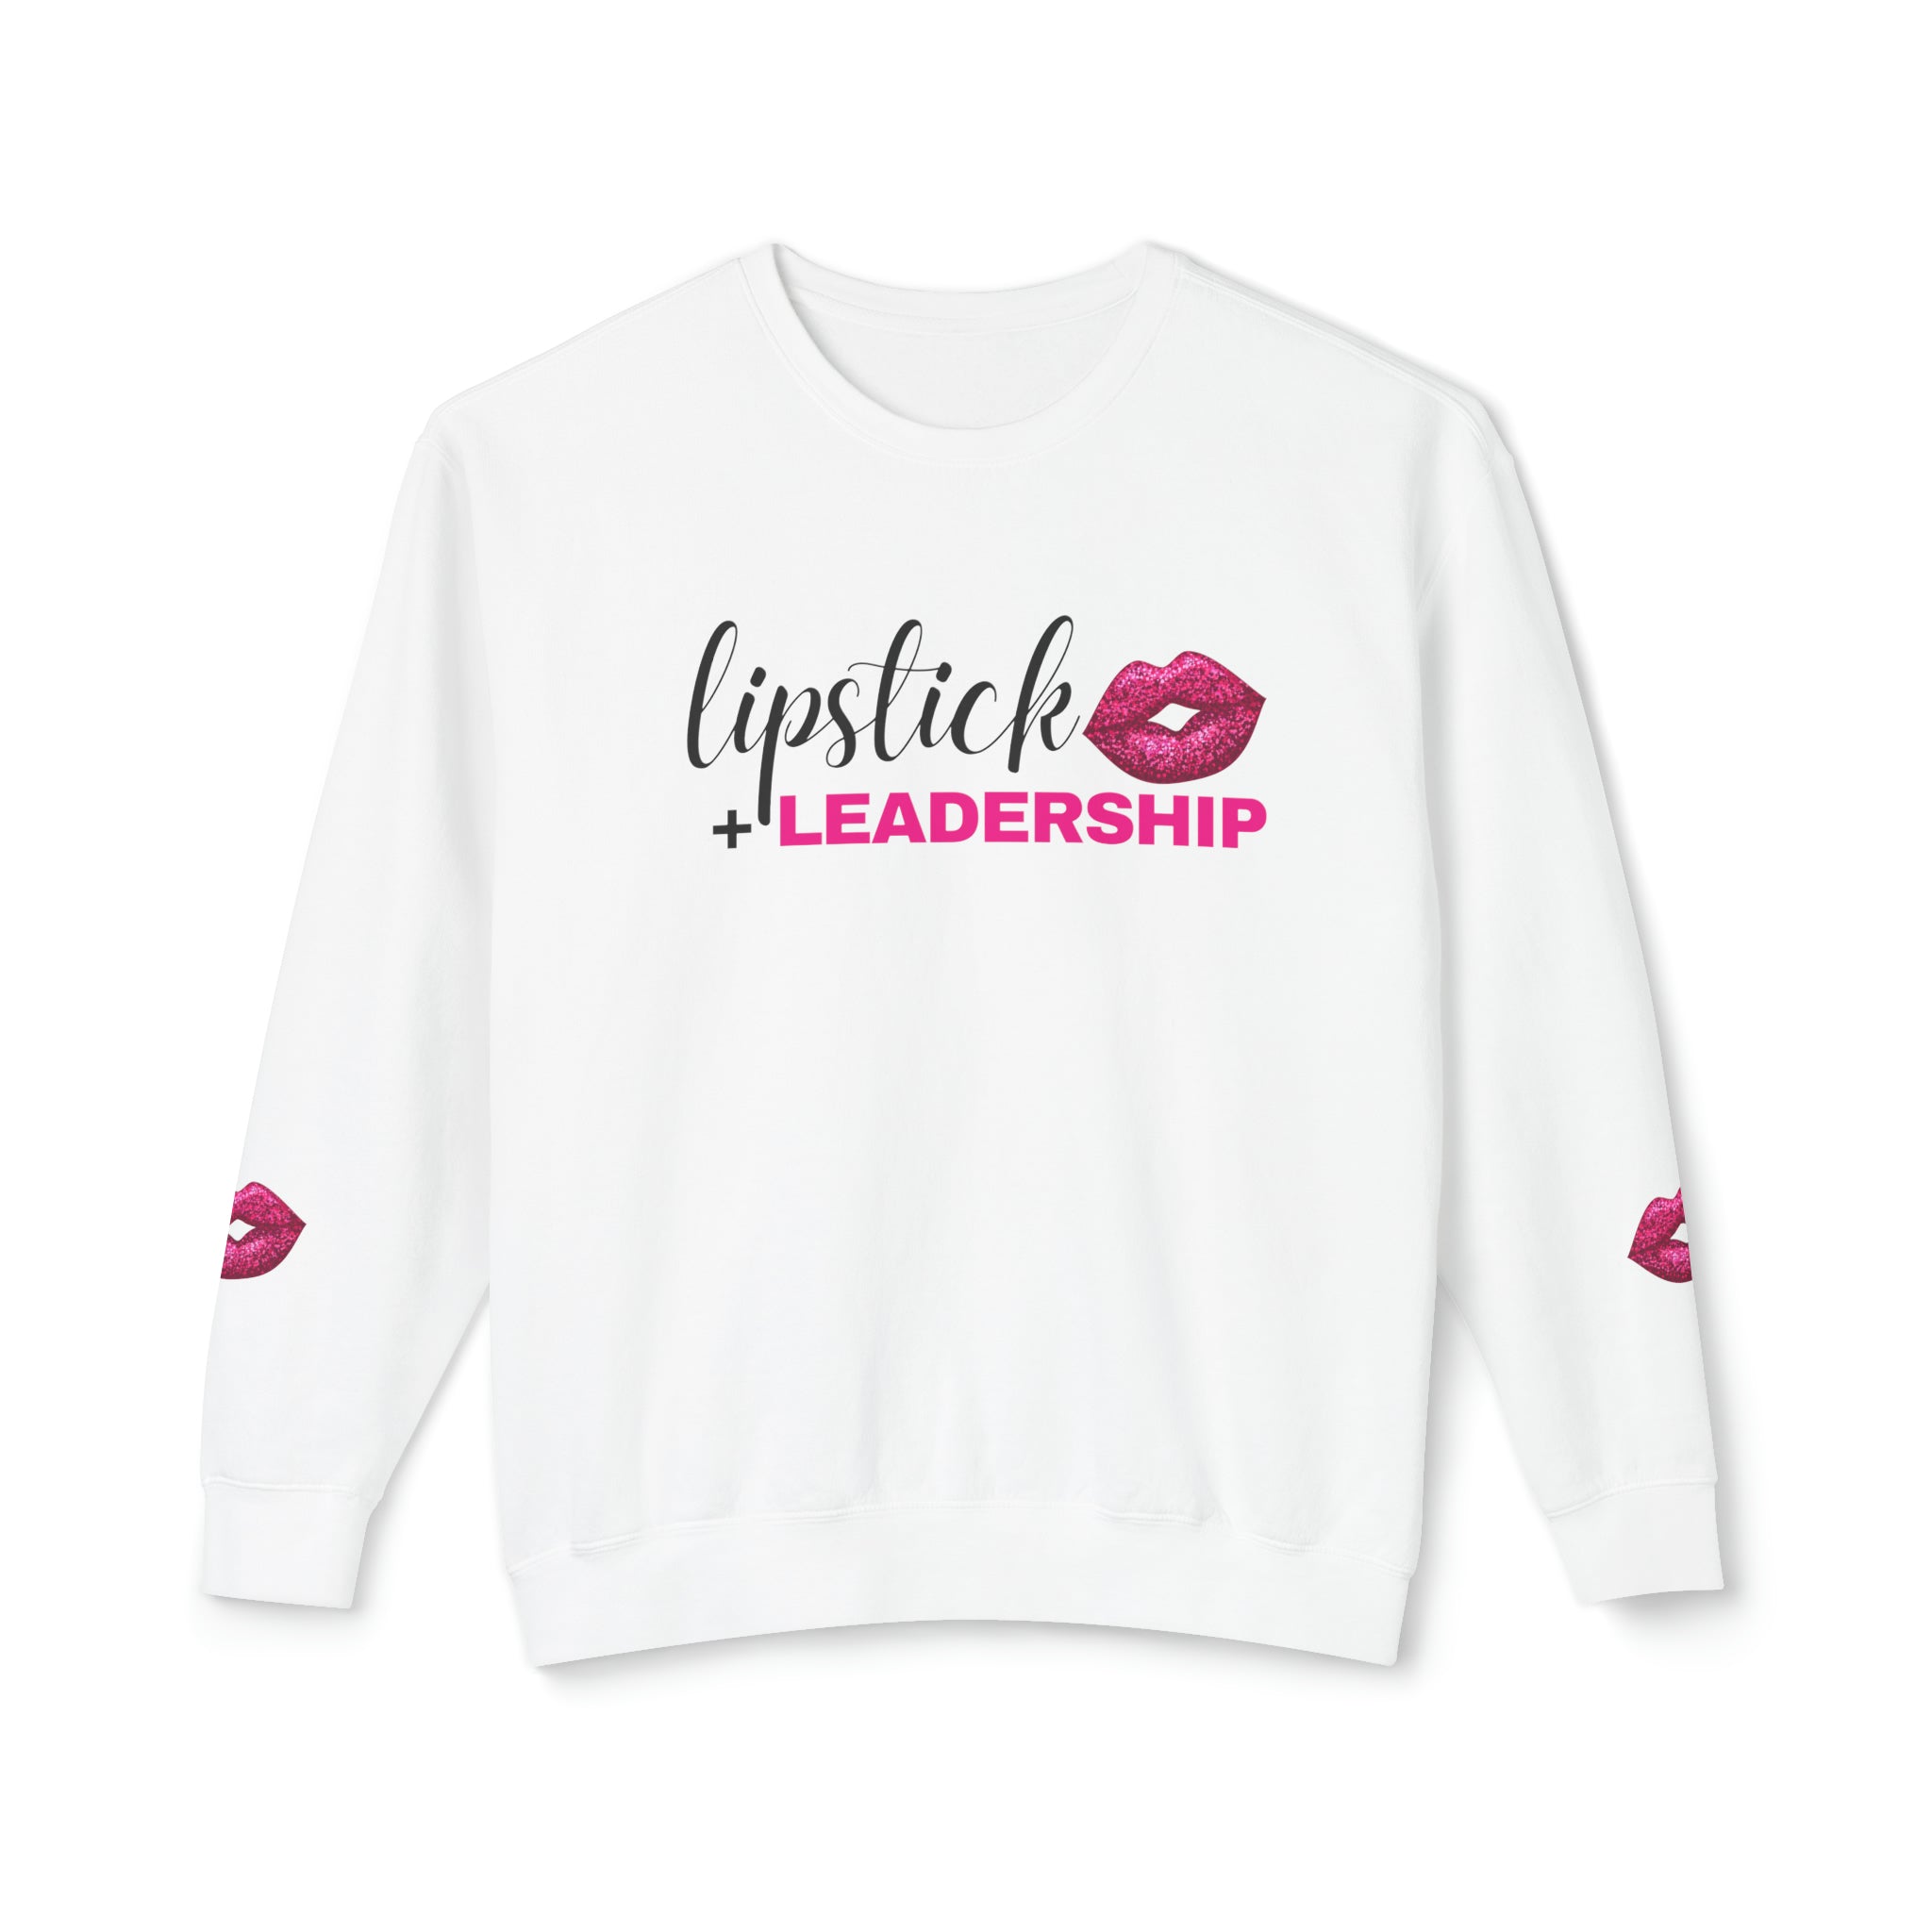 Lipstick + Leadership (Pink Sparkle Lips) Relaxed Fit Lightweight Crewneck Sweatshirt, Makeup Sweatshirt, Beauty Business Sweatshirt Sweatshirt White-3XL The Middle Aged Groove